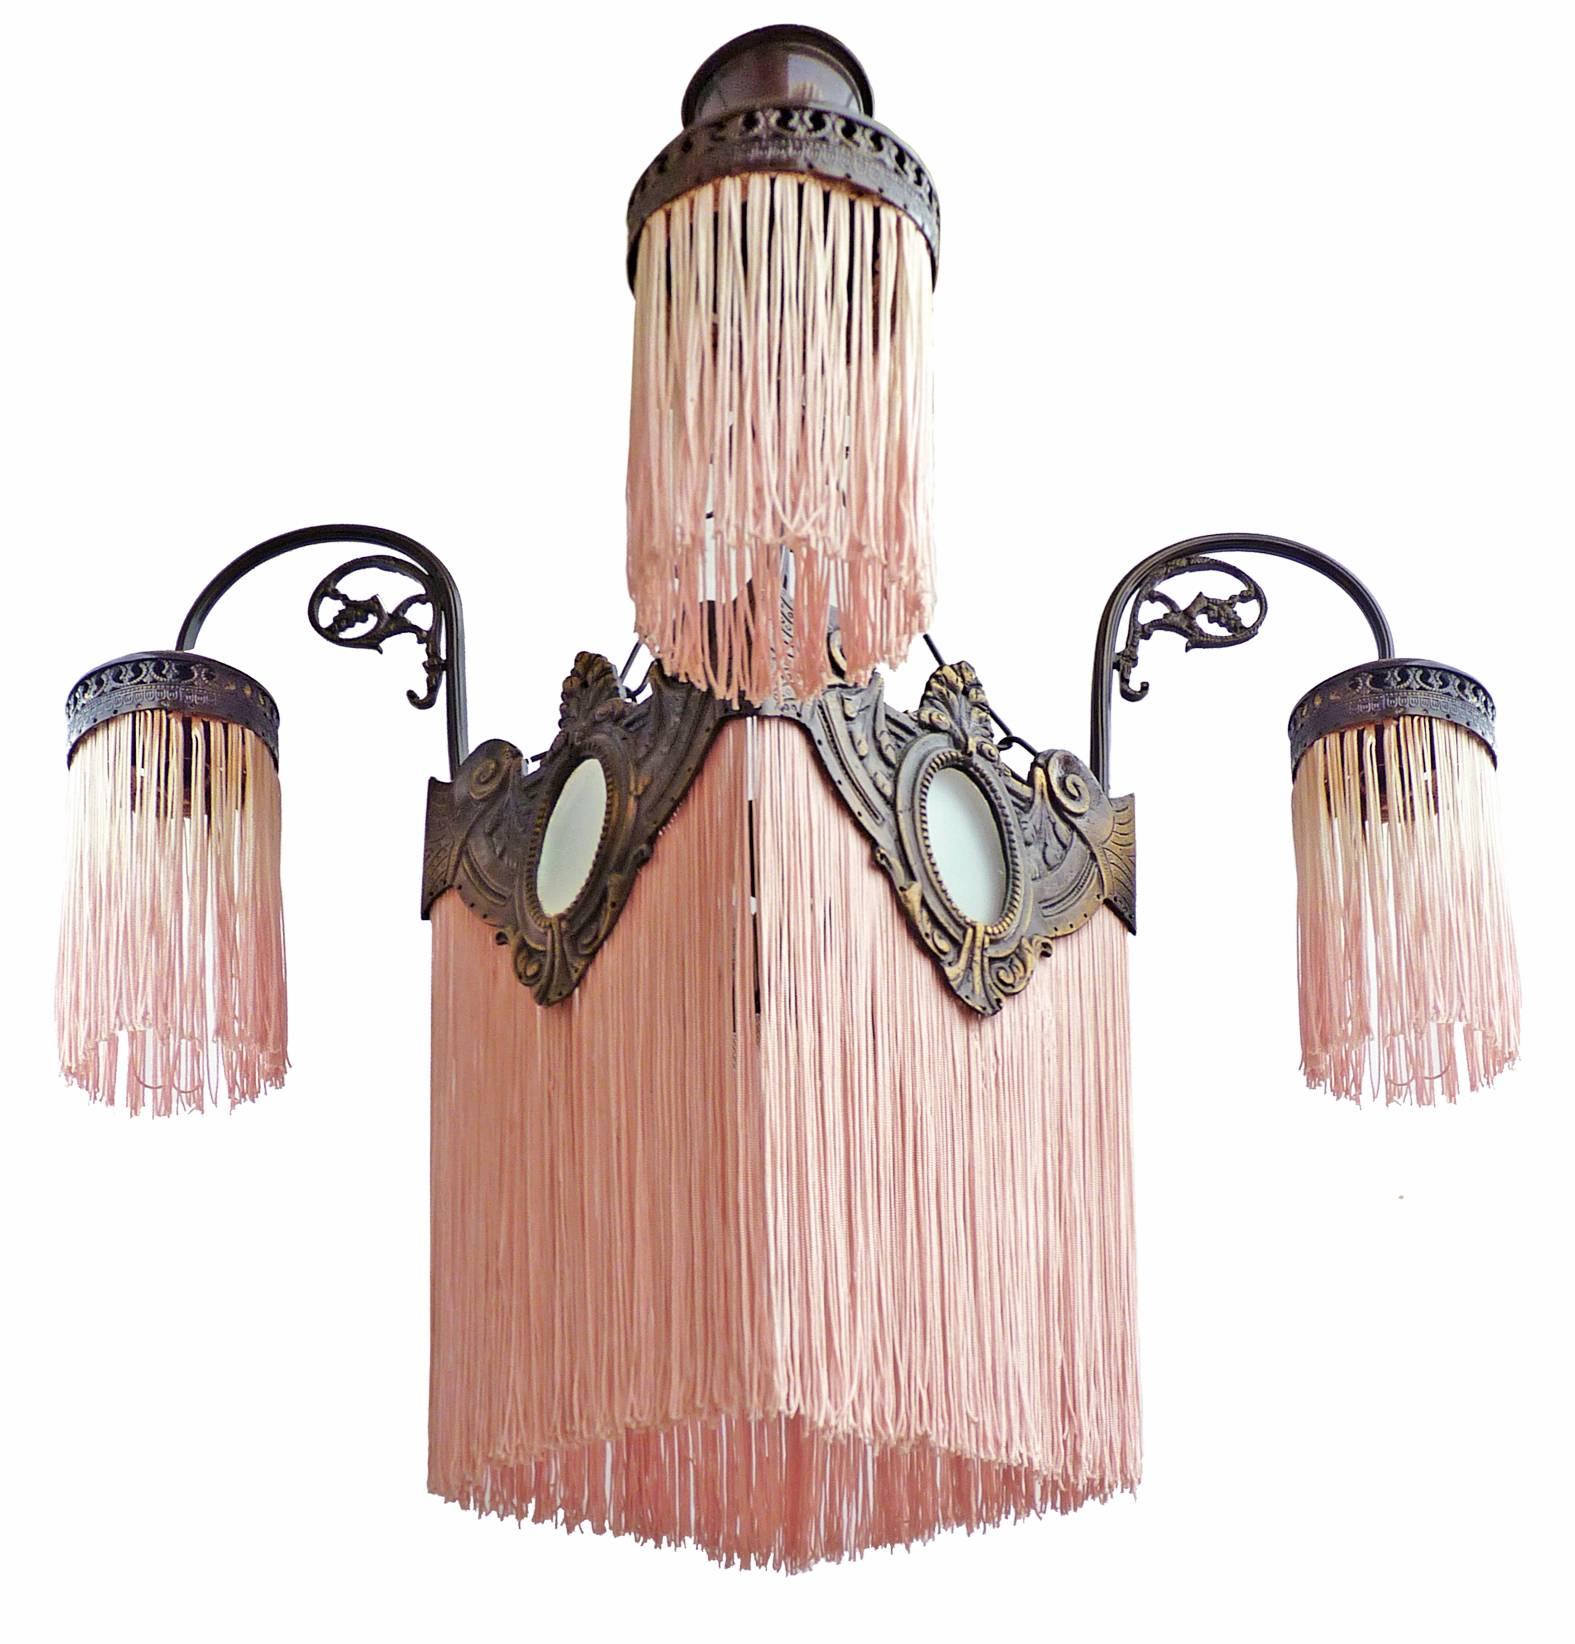 Antique French pink fringes and bronze Art Nouveau/Art Deco chandelier
Measures:
Diameter 20 in/ 50 cm
Diagonal; 26 in/ 66 cm
Height 32 in/ 80 cm
Weight 4.5 Kg / 5 lb
Five-light bulbs E14 / good working condition/European wiring.
Your item